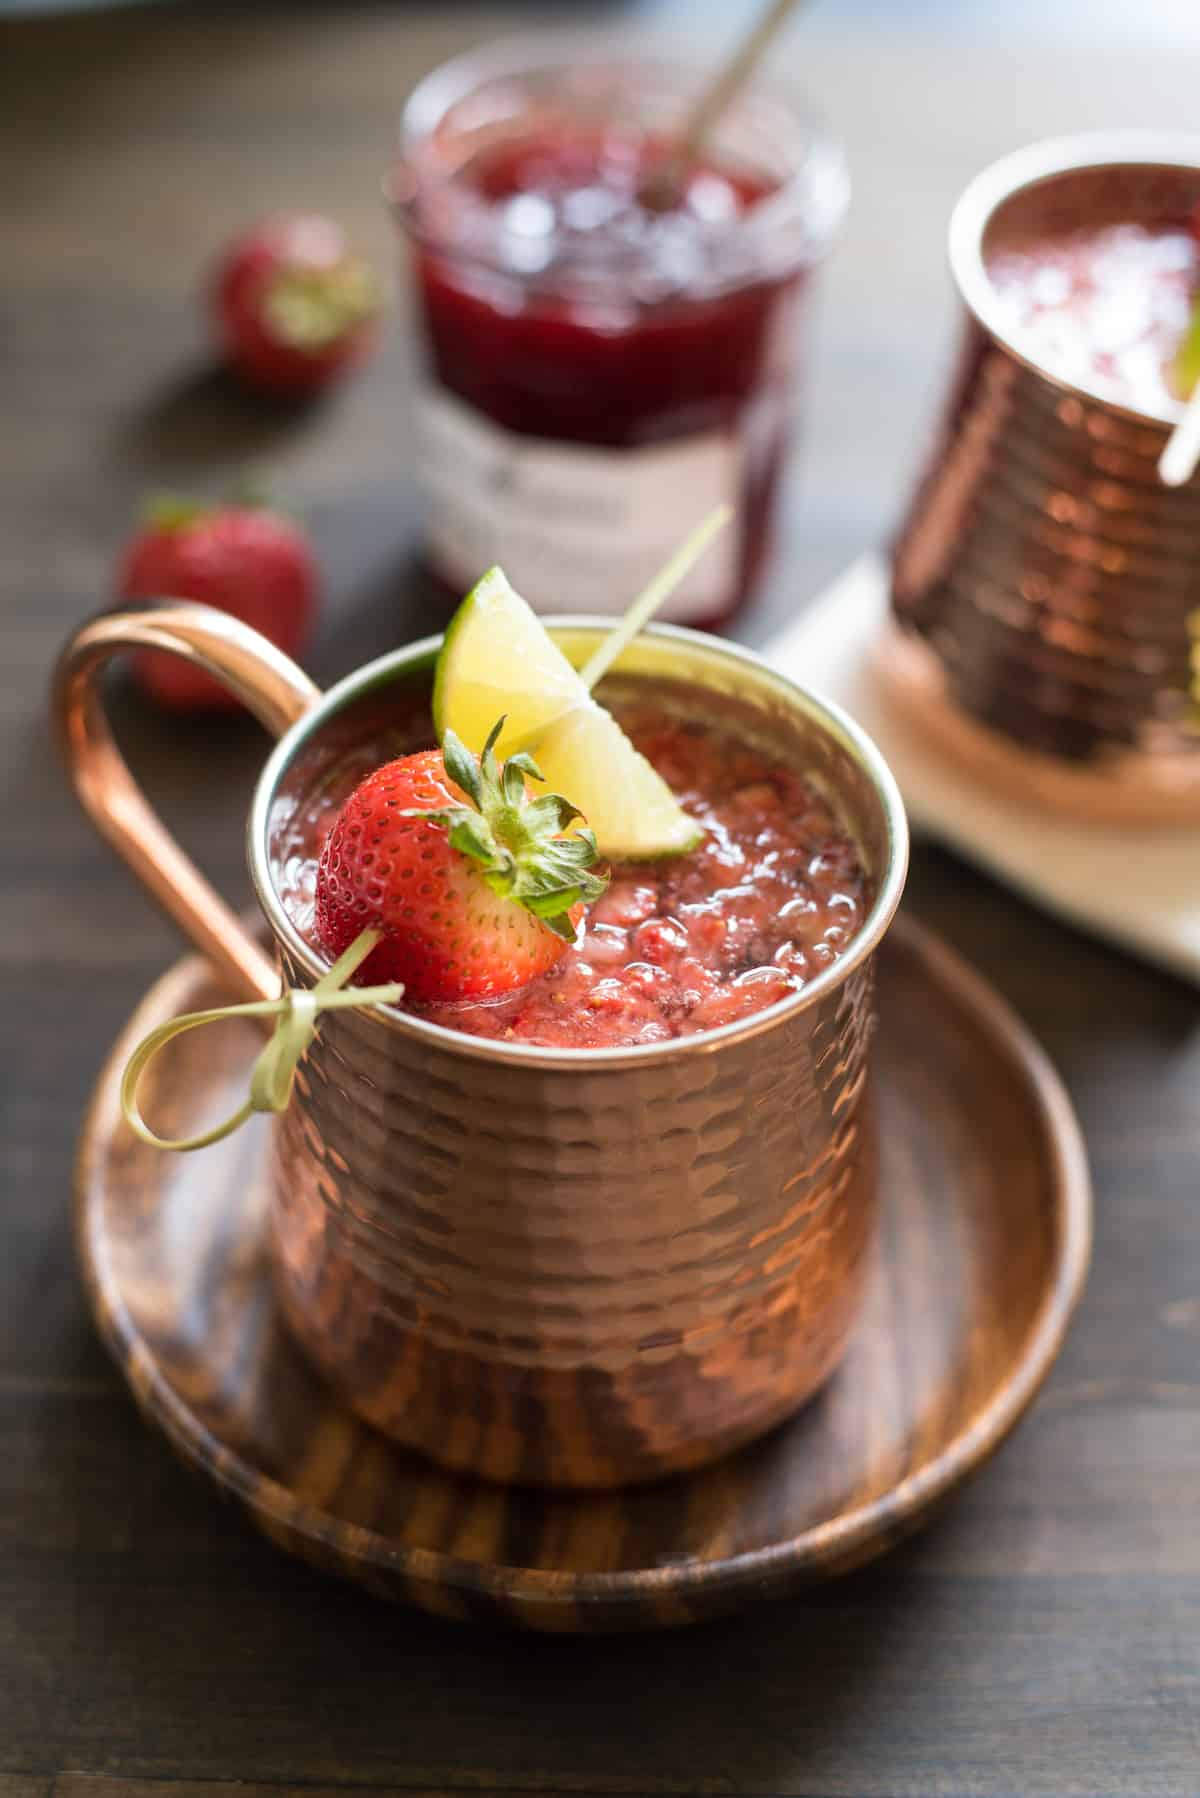 Hammered copper mug filled with strawberry Moscow mule, garnished with a skewer with a strawberry and lime wedge. Mug is resting on small wooden plate.